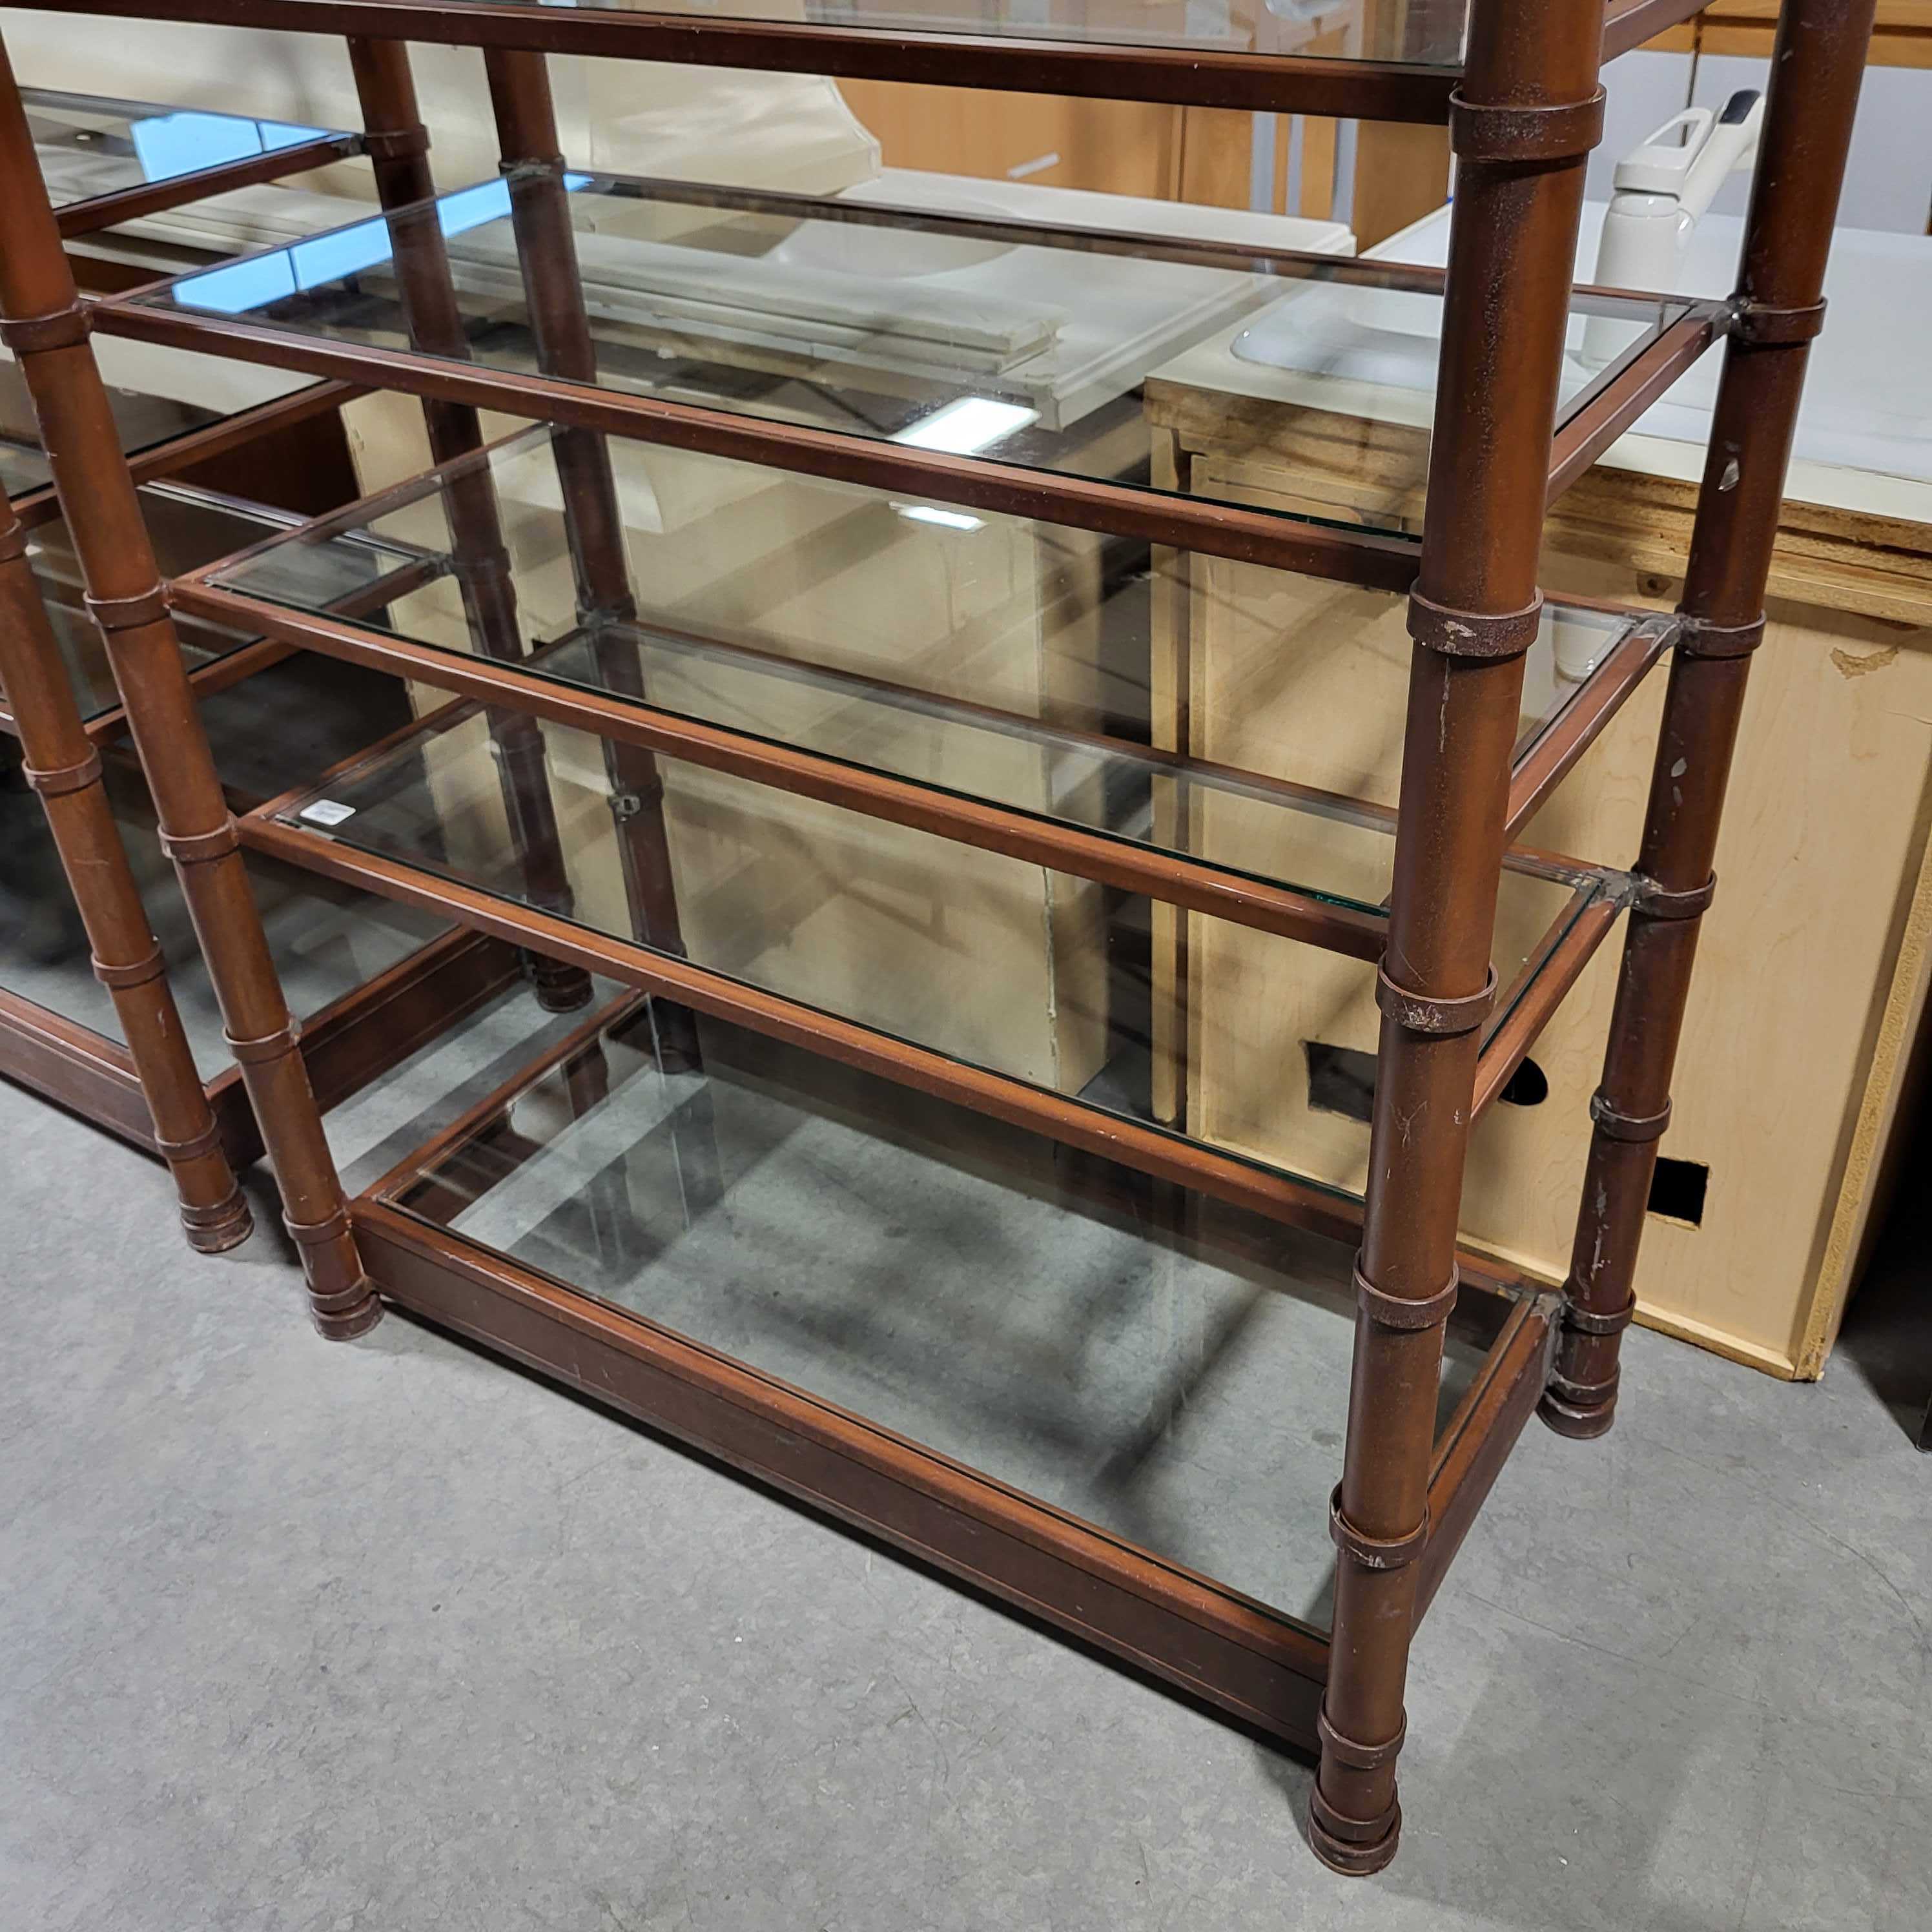 Rustic Bronze Toned Metal and Glass Shelving Unit